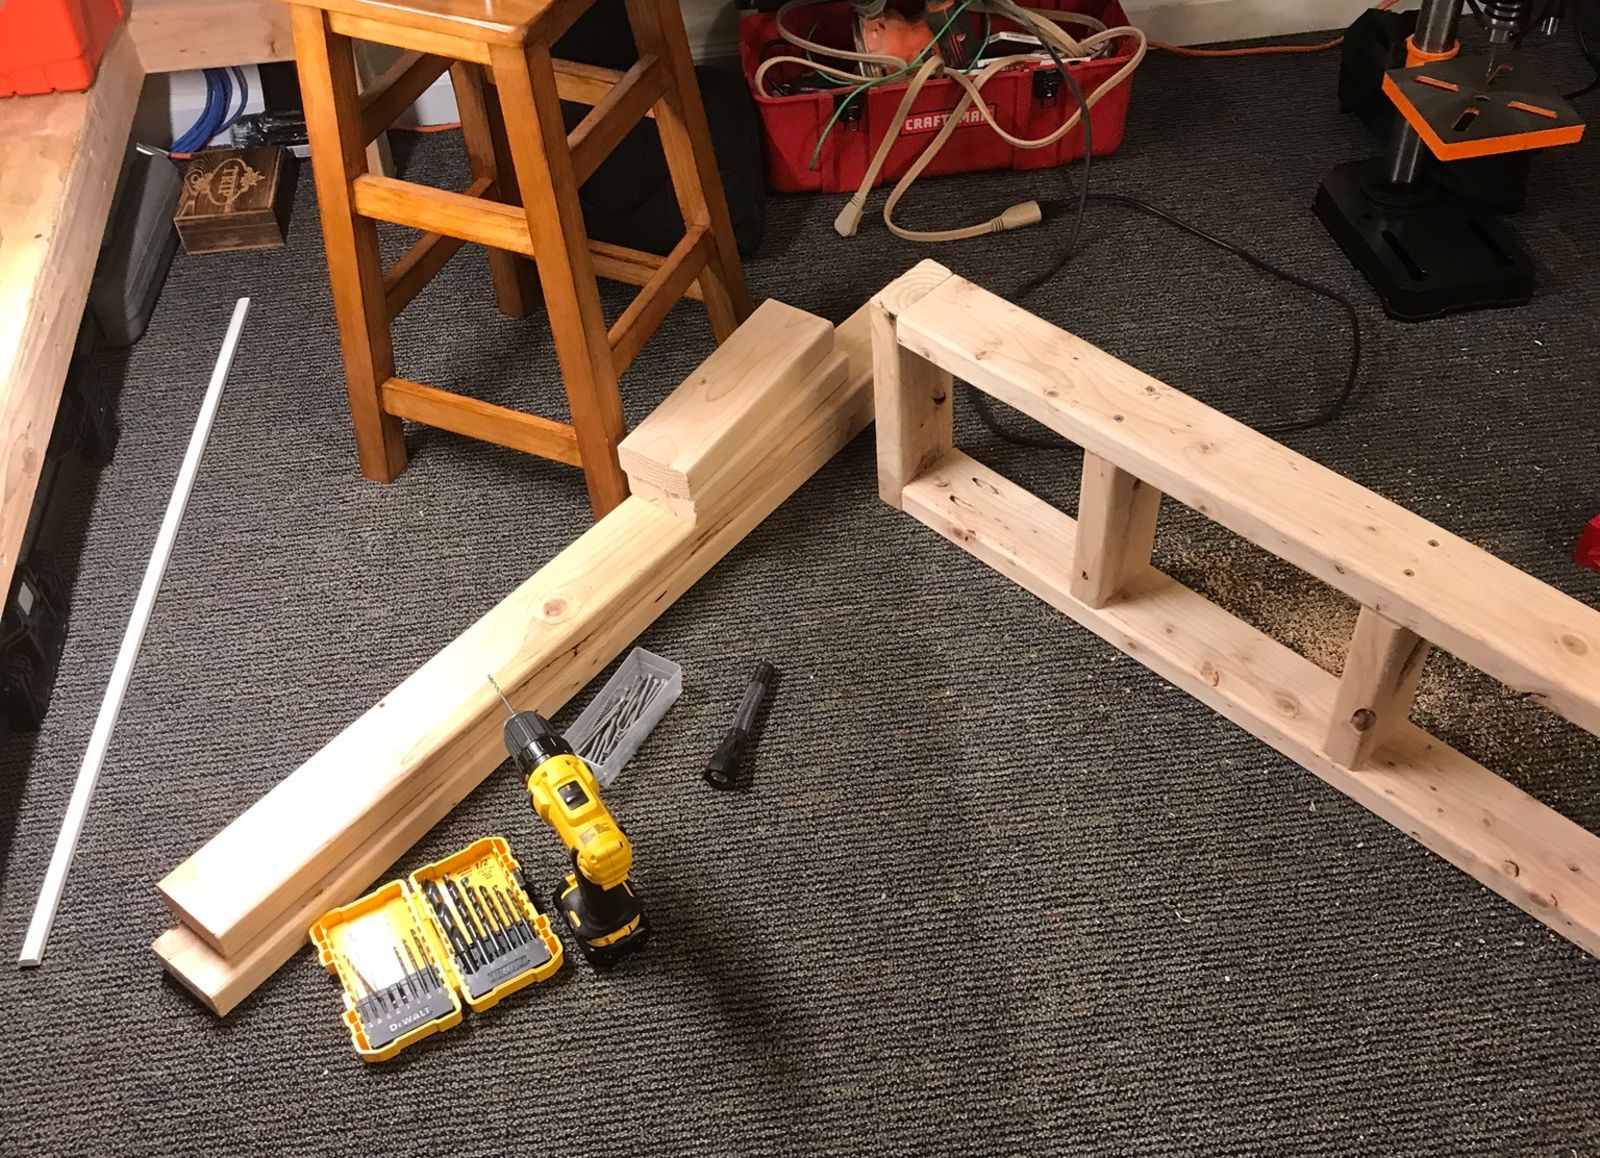 I forgot to take an initial pic, but in case you’re wondering it looked like a larger pile of wood before I built that first box